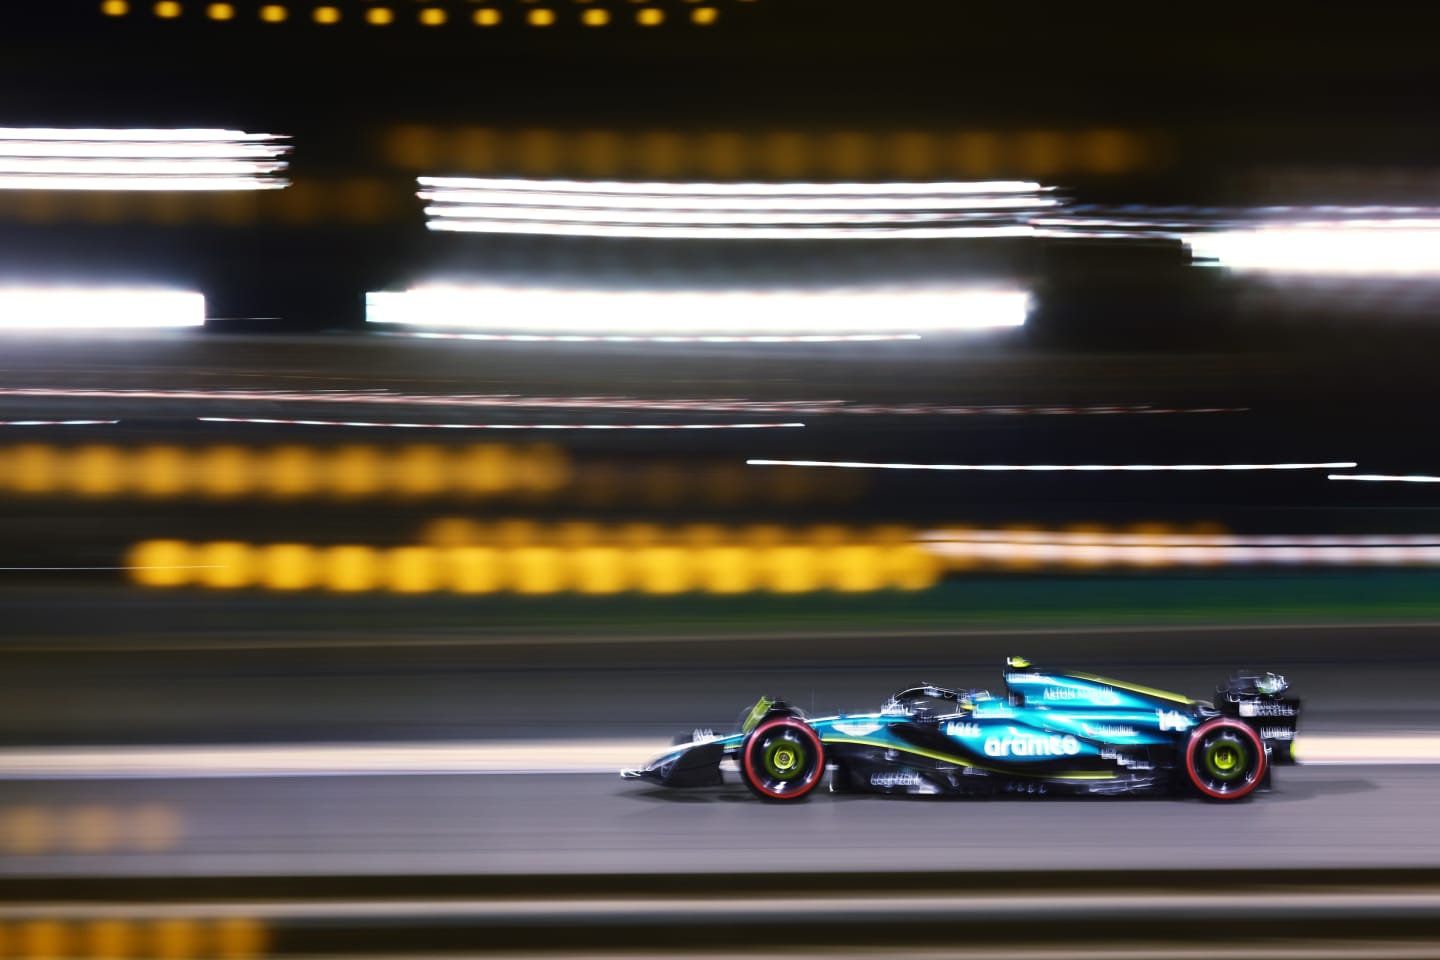 BAHRAIN, BAHRAIN - MARCH 01: Fernando Alonso of Spain driving the (14) Aston Martin AMR24 Mercedes on track during qualifying ahead of the F1 Grand Prix of Bahrain at Bahrain International Circuit on March 01, 2024 in Bahrain, Bahrain. (Photo by Clive Rose/Getty Images)